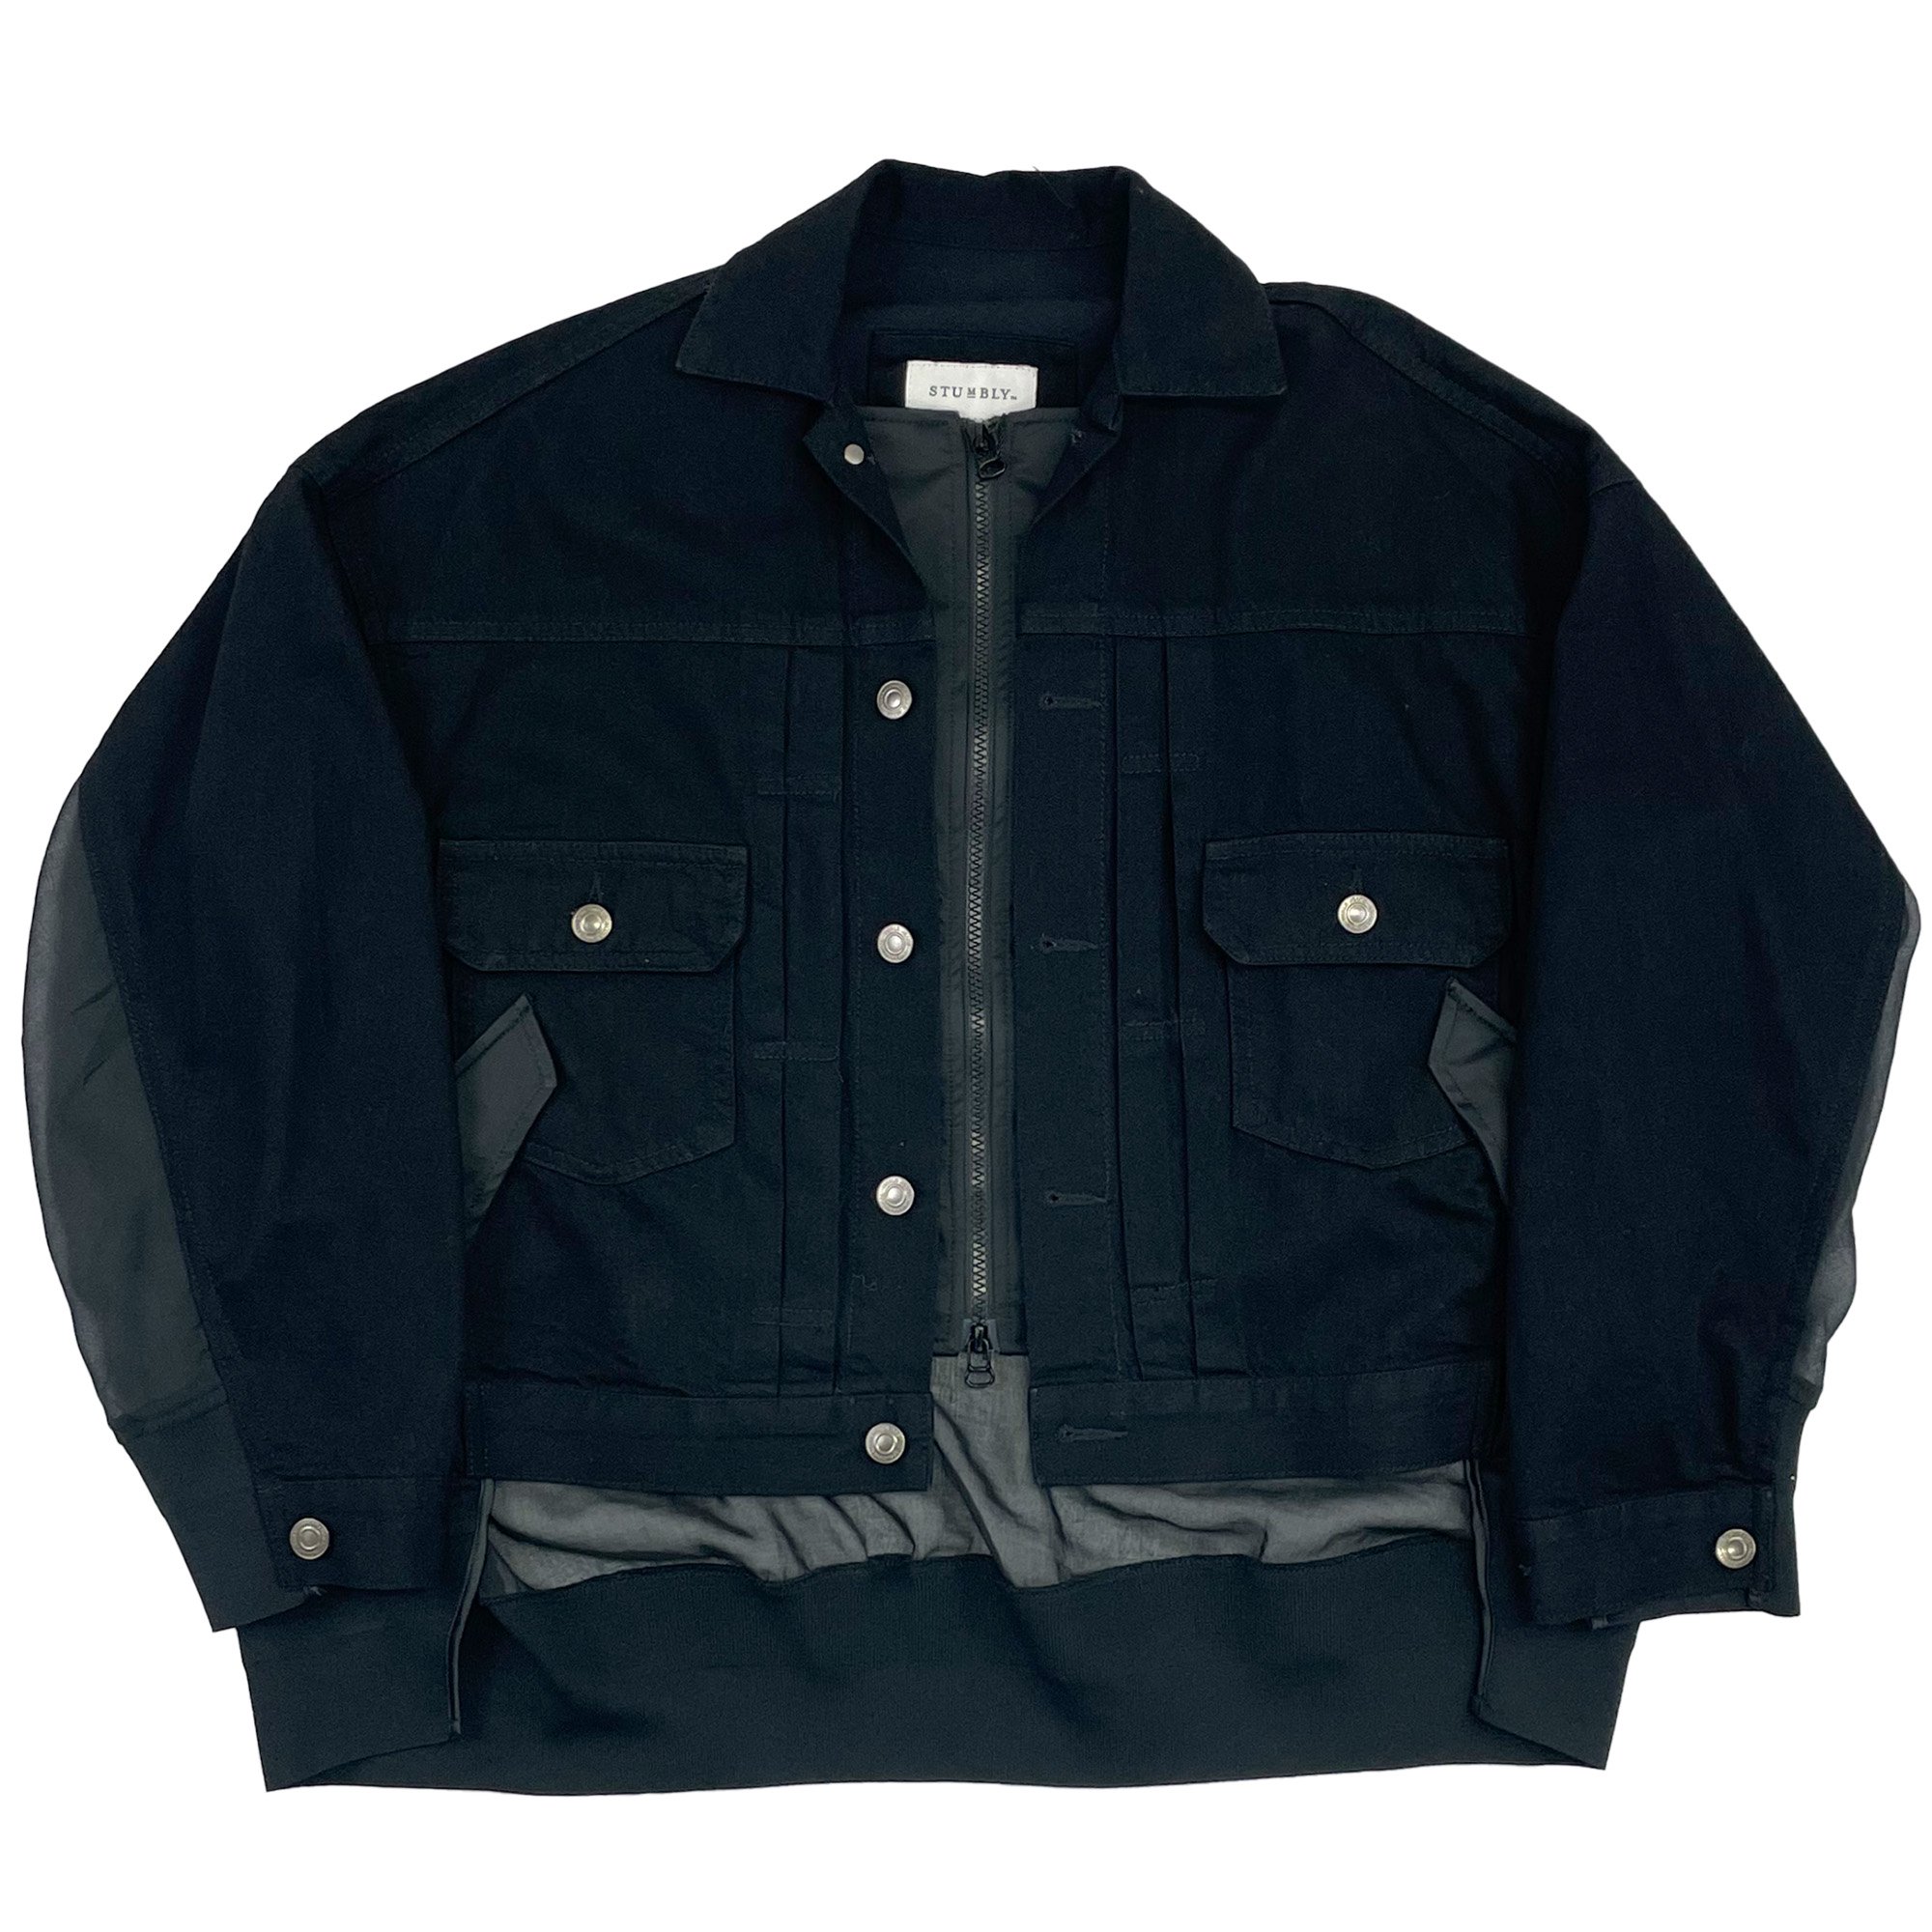 <img class='new_mark_img1' src='https://img.shop-pro.jp/img/new/icons47.gif' style='border:none;display:inline;margin:0px;padding:0px;width:auto;' />STUMBLY DENIM ORGANDY COMBINATION JACKET